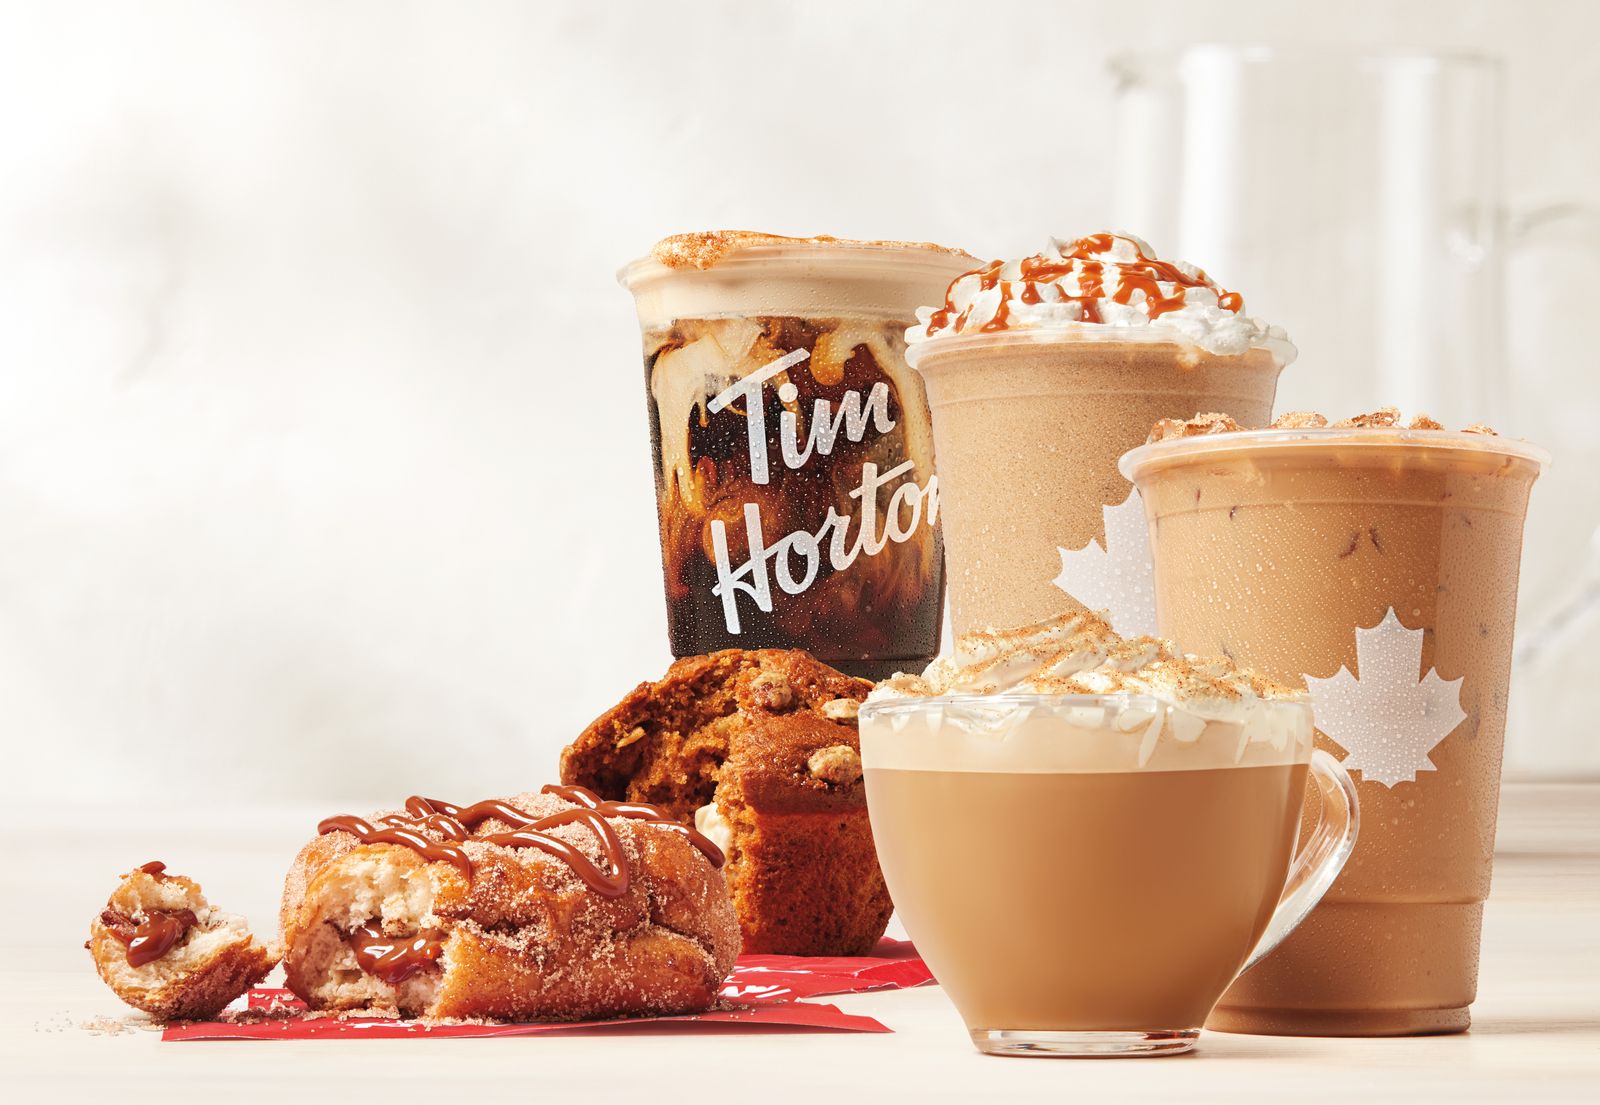 Tim Hortons to launch festive holiday menu across Canada this week